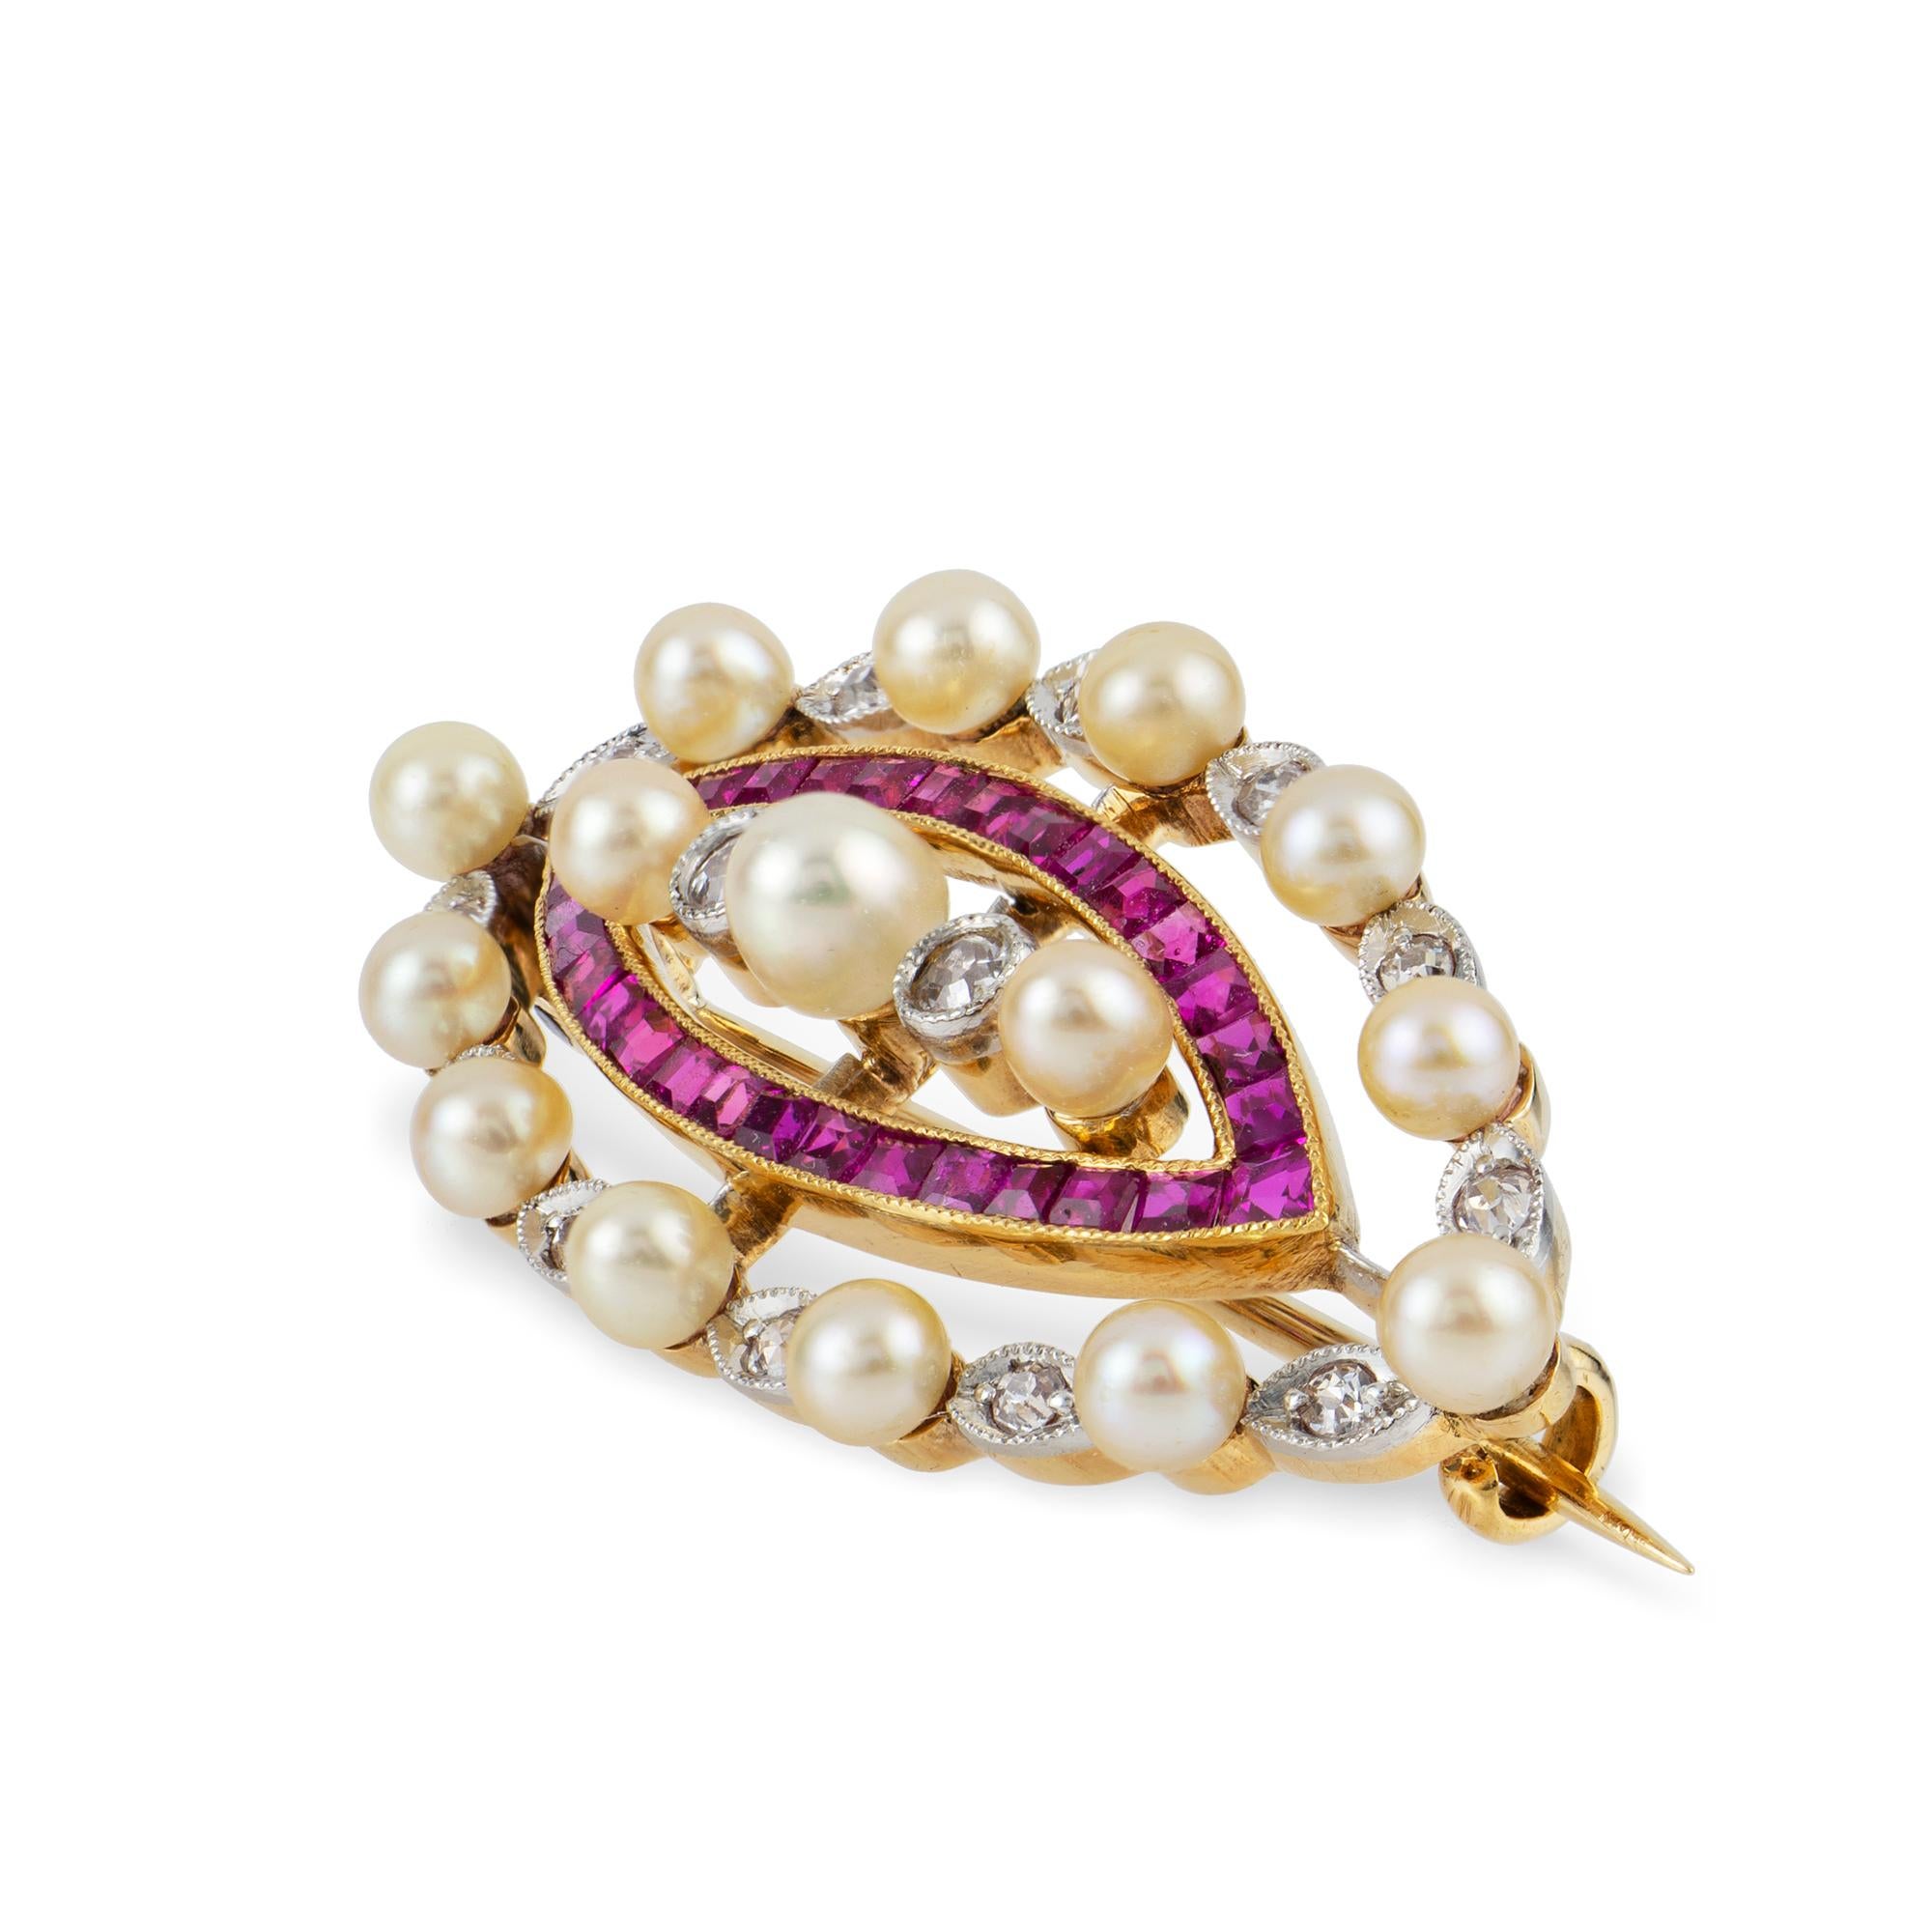 An Edwardian pearl diamond and ruby brooch, to the centre three pearls horizontally set with two swiss-cut diamonds in-between, surrounded by a marquise-shape frame encrusted with calibre-cut rubies and an outer frame consisted of twelve pearls